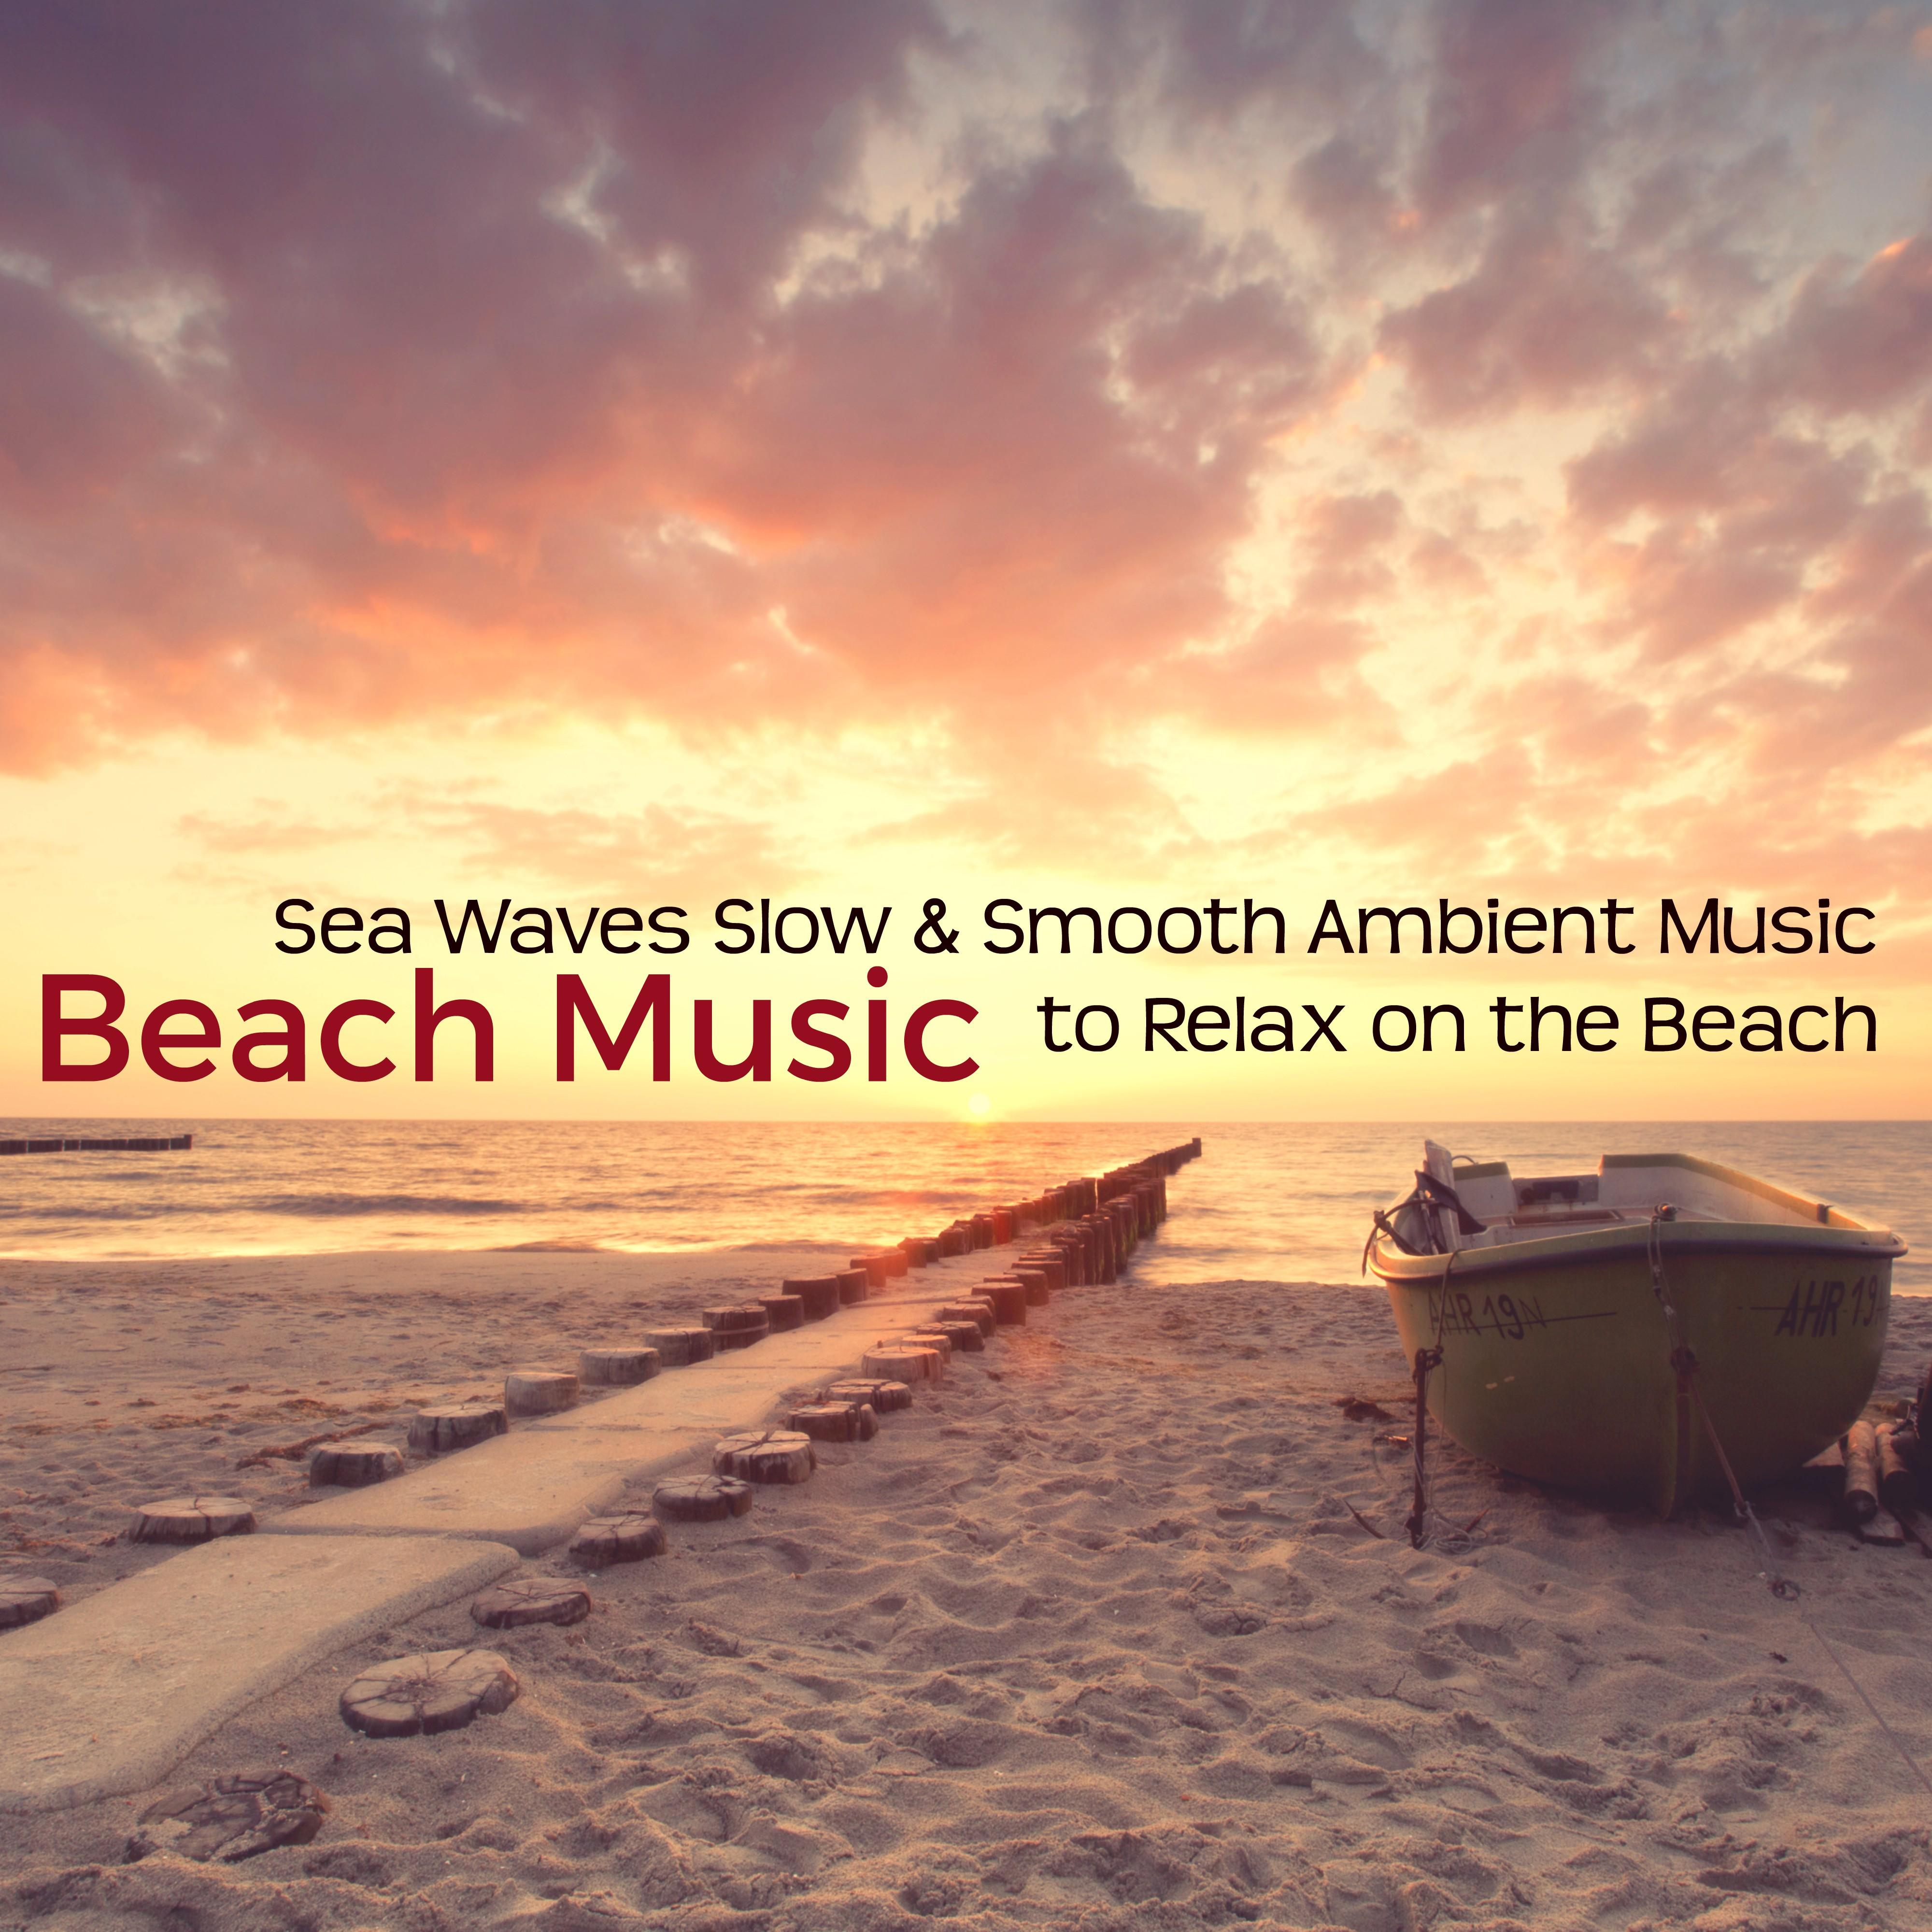 Beach Music  Sea Waves Slow  Smooth Ambient Music to Relax on the Beach